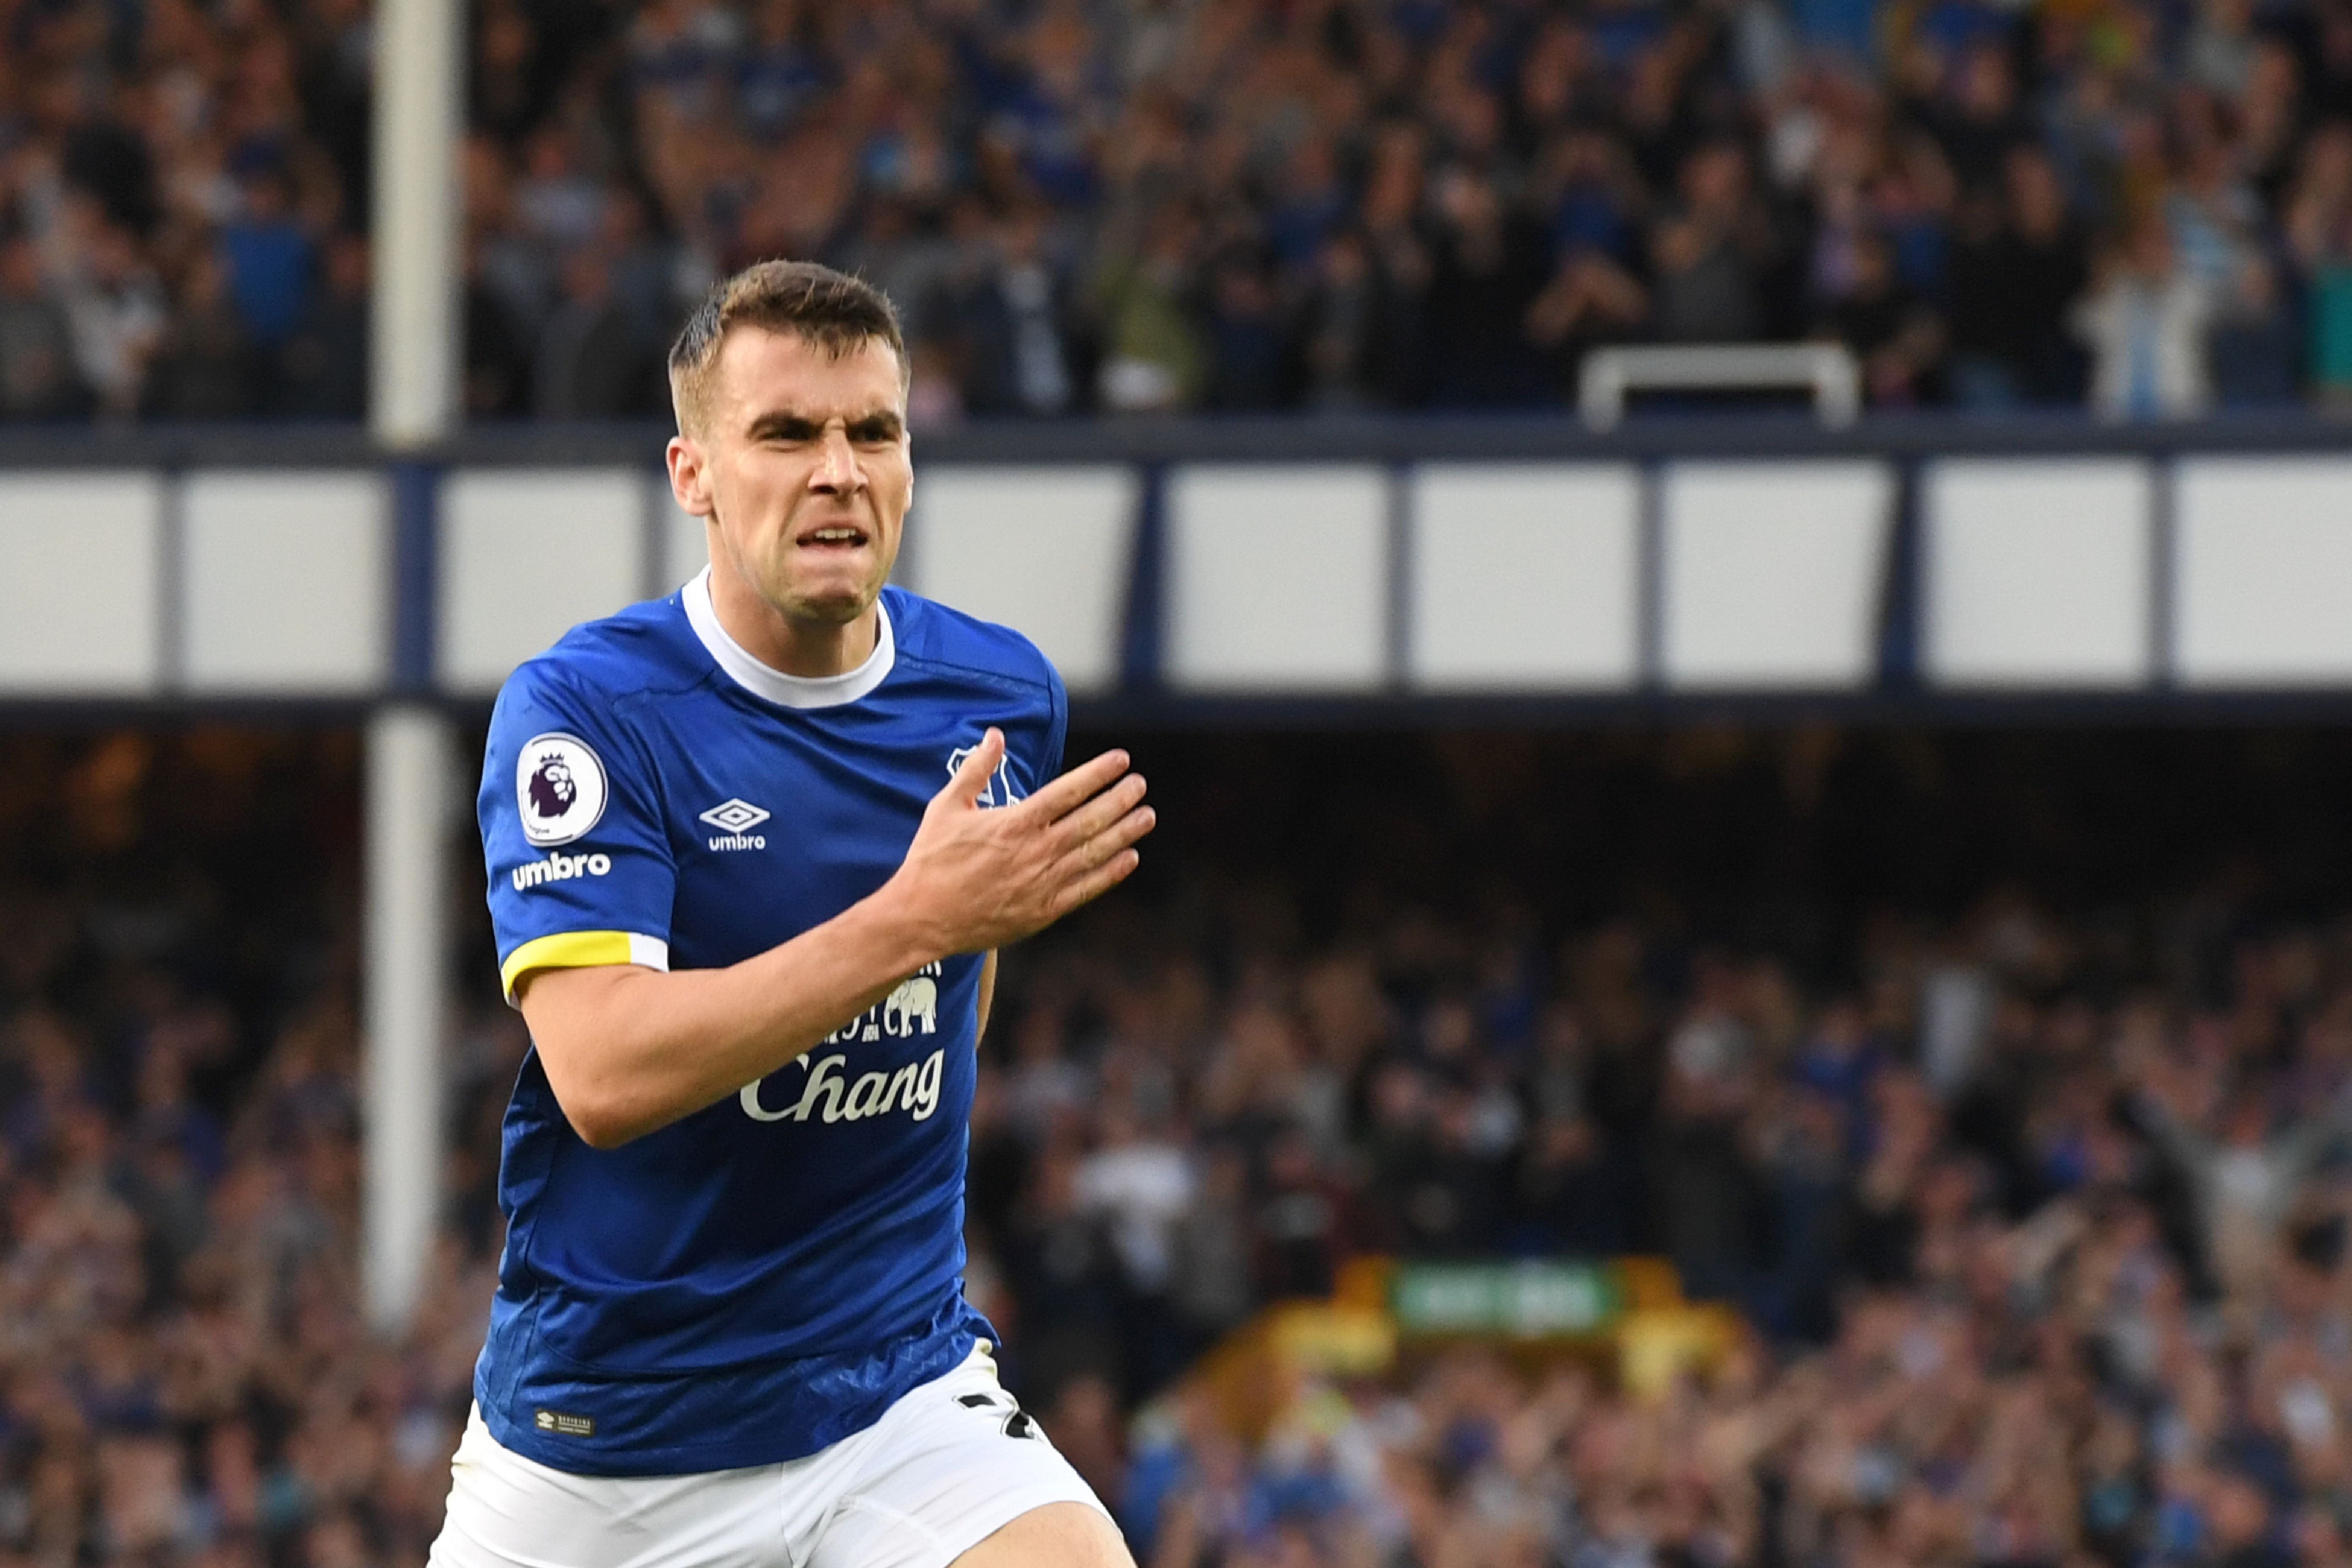 Everton's Irish defender Seamus Coleman celebrates after scoring during the English Premier League football match between Everton and Middlesbrough at Goodison Park in Liverpool, north west England on September 17, 2016. / AFP / ANTHONY DEVLIN / RESTRICTED TO EDITORIAL USE. No use with unauthorized audio, video, data, fixture lists, club/league logos or 'live' services. Online in-match use limited to 75 images, no video emulation. No use in betting, games or single club/league/player publications.  /         (Photo credit should read ANTHONY DEVLIN/AFP/Getty Images)